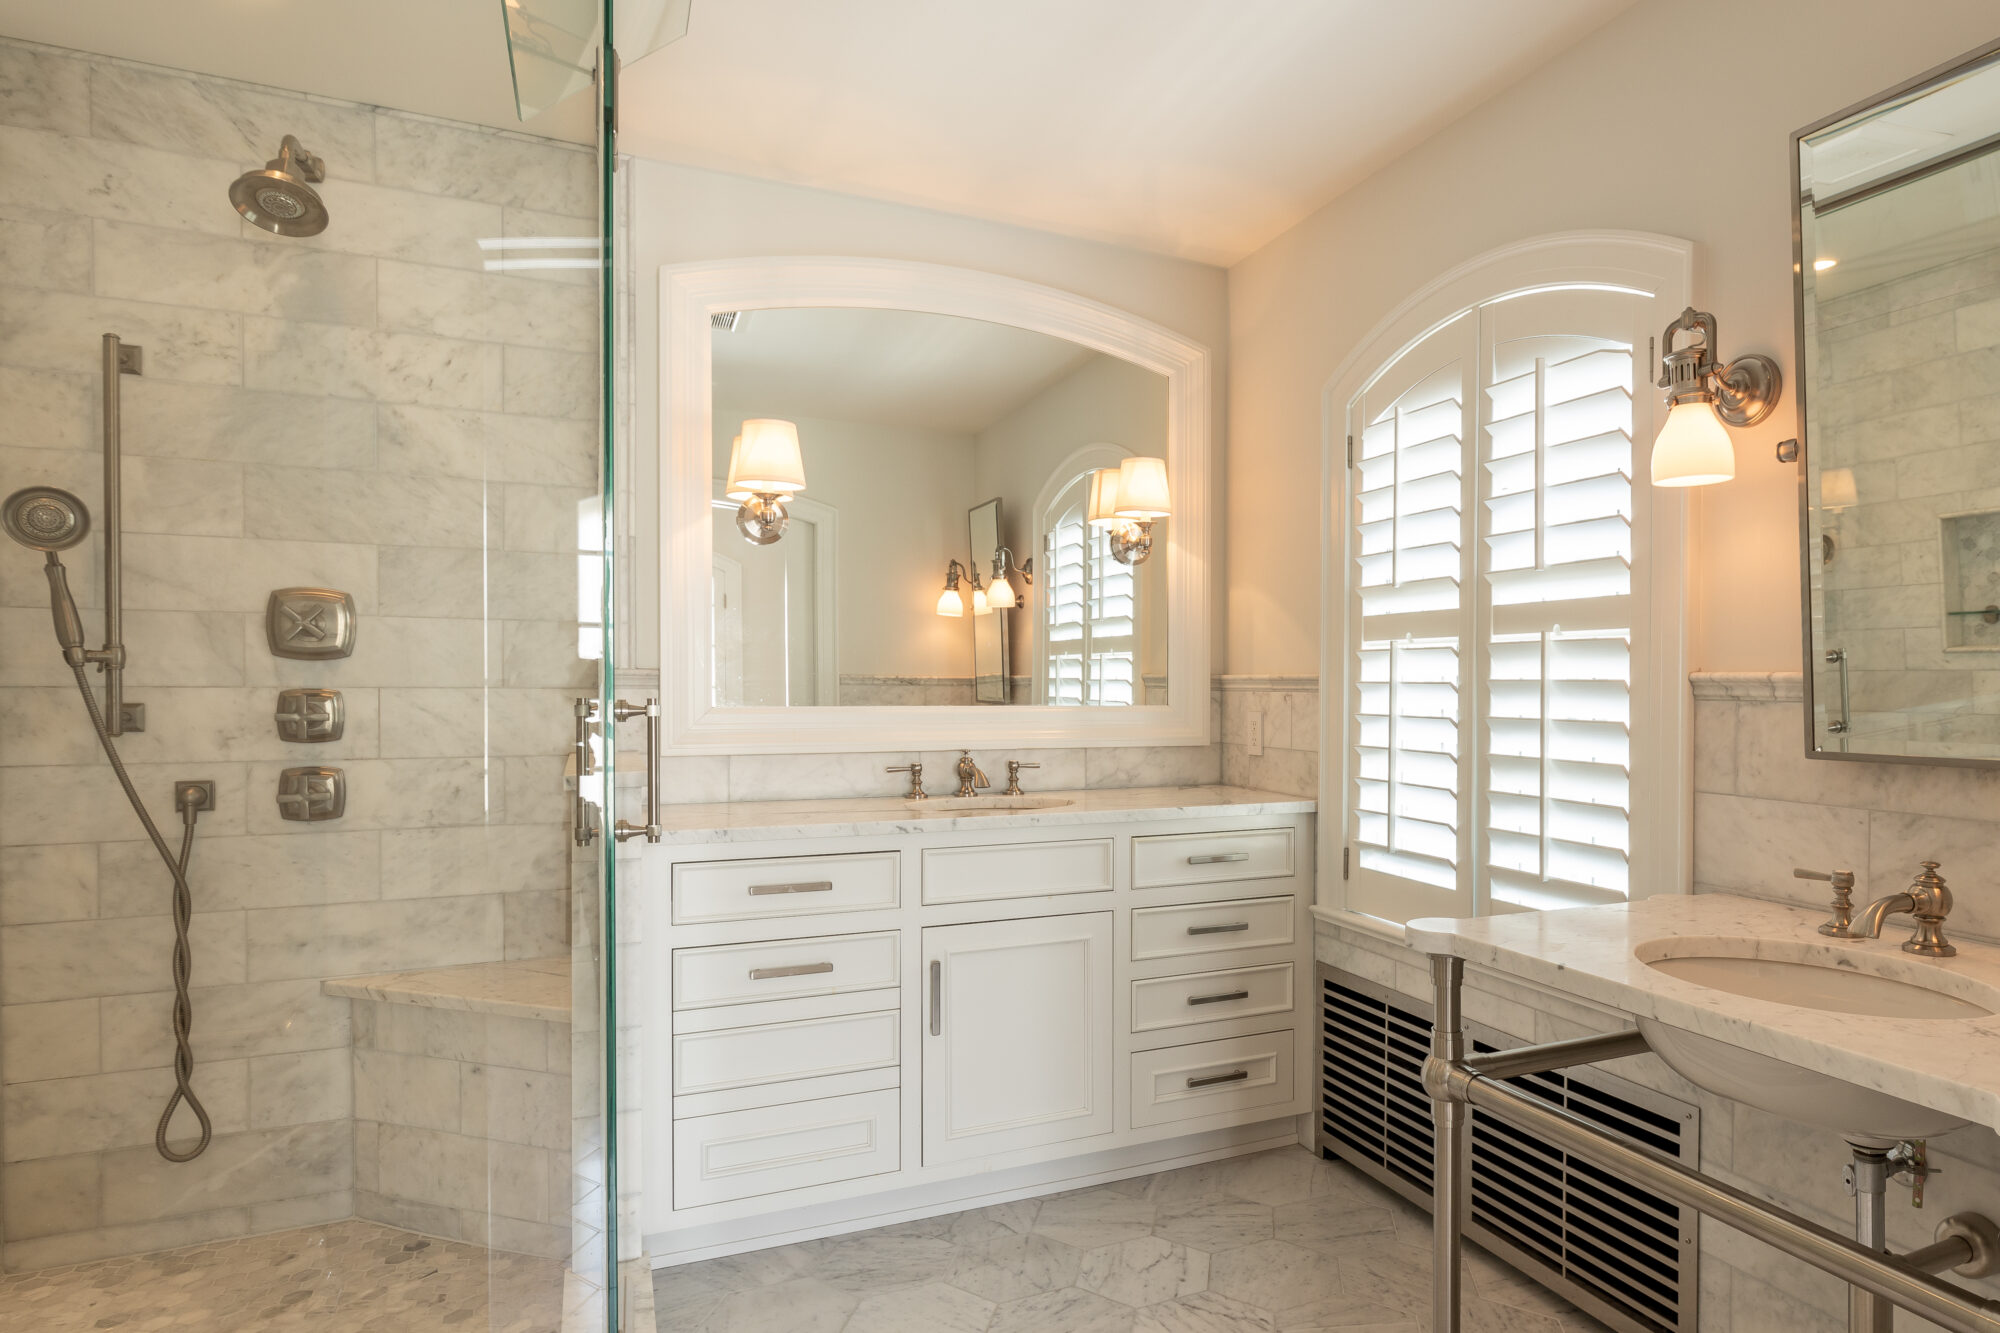 Refined bathroom transformation by R.E. McNamara Inc., showcasing a stylish walk-in shower with a transparent glass door, crisp white cabinetry, sophisticated marble tiles, and tasteful modern accents.